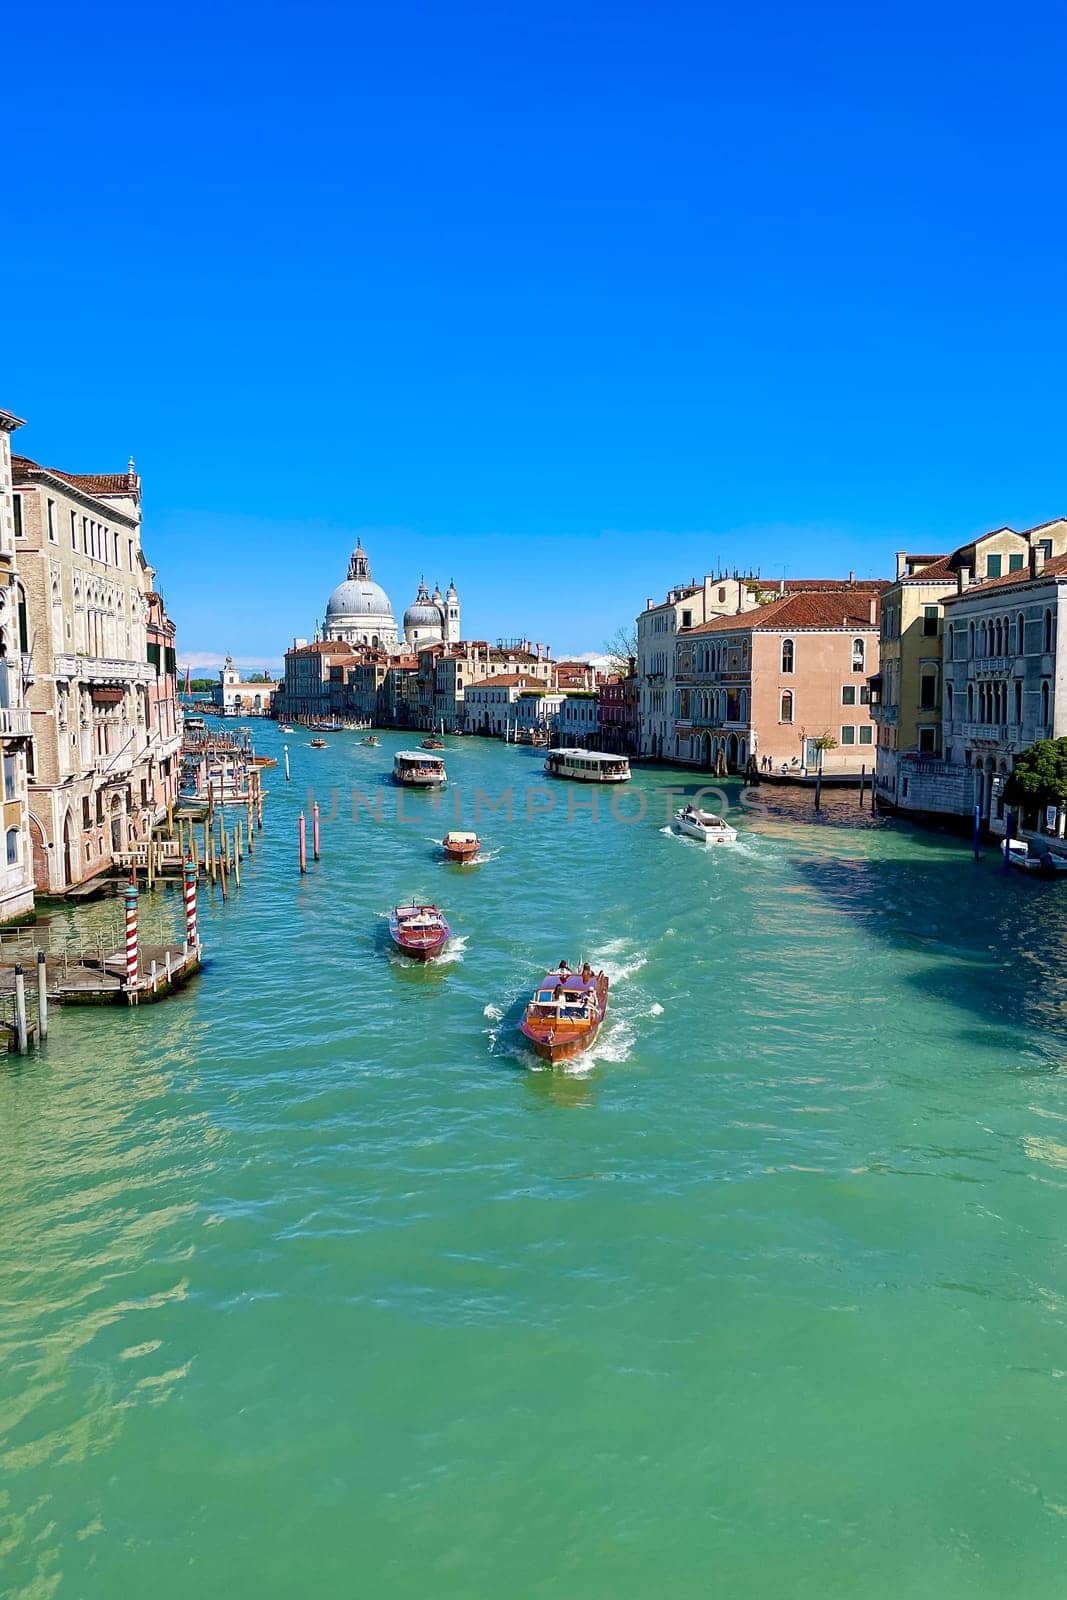 View from the big bridge on the Grand Canal, the most famous channel of Venice between the islands of the lagoon